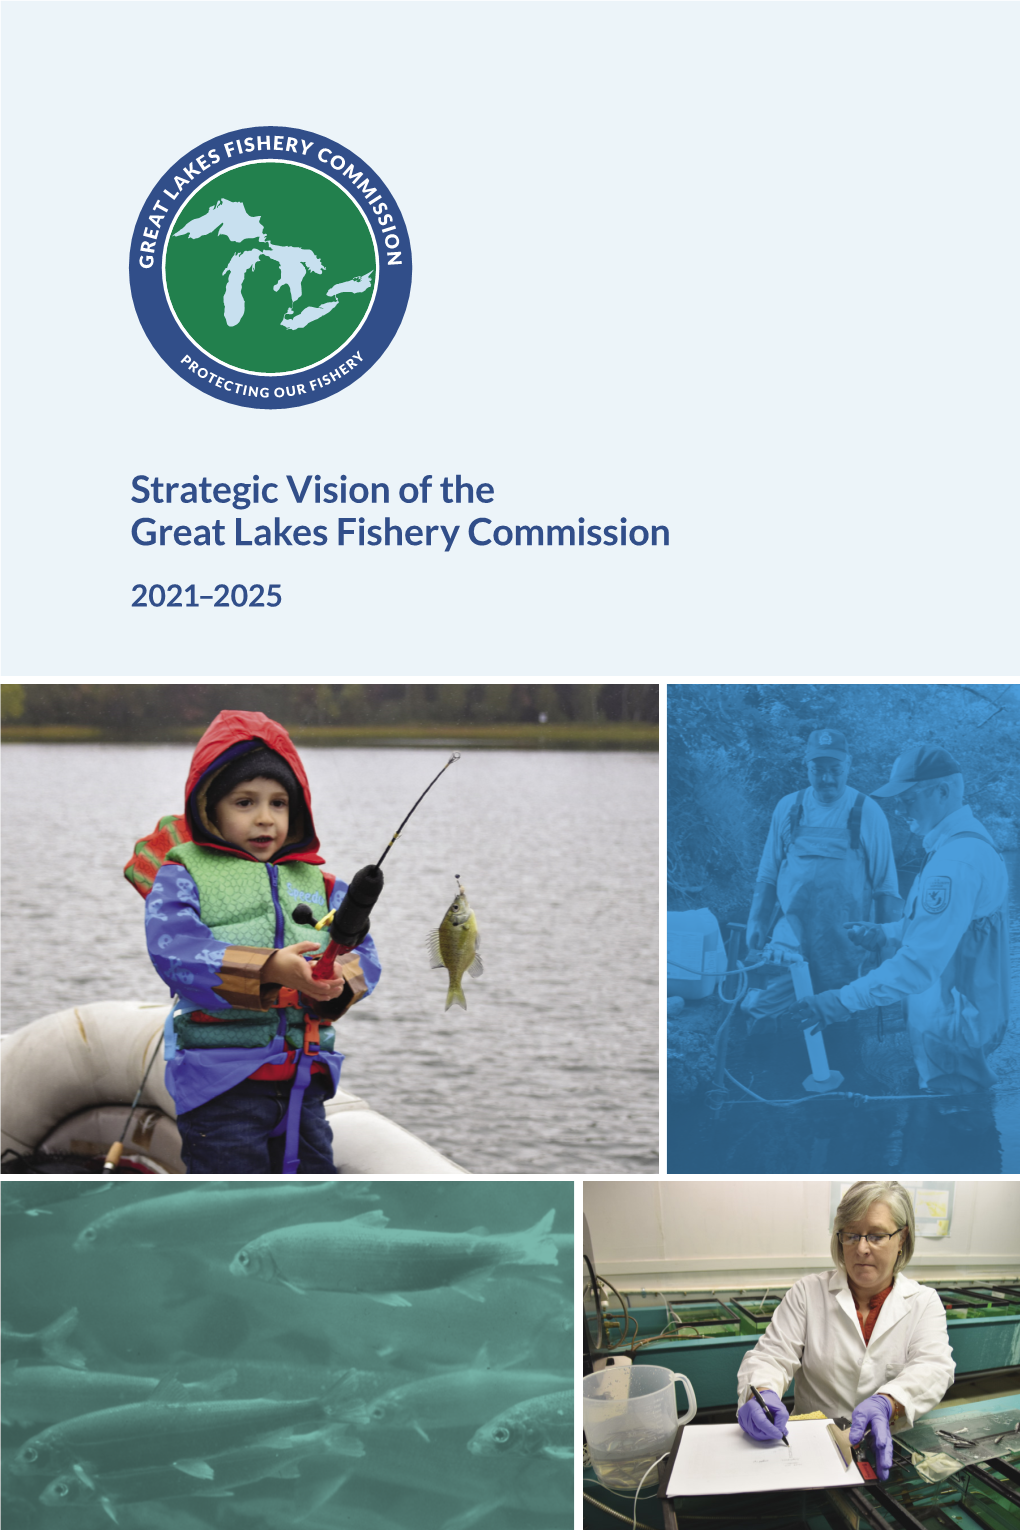 Strategic Vision of the Great Lakes Fishery Commission 2021-2025